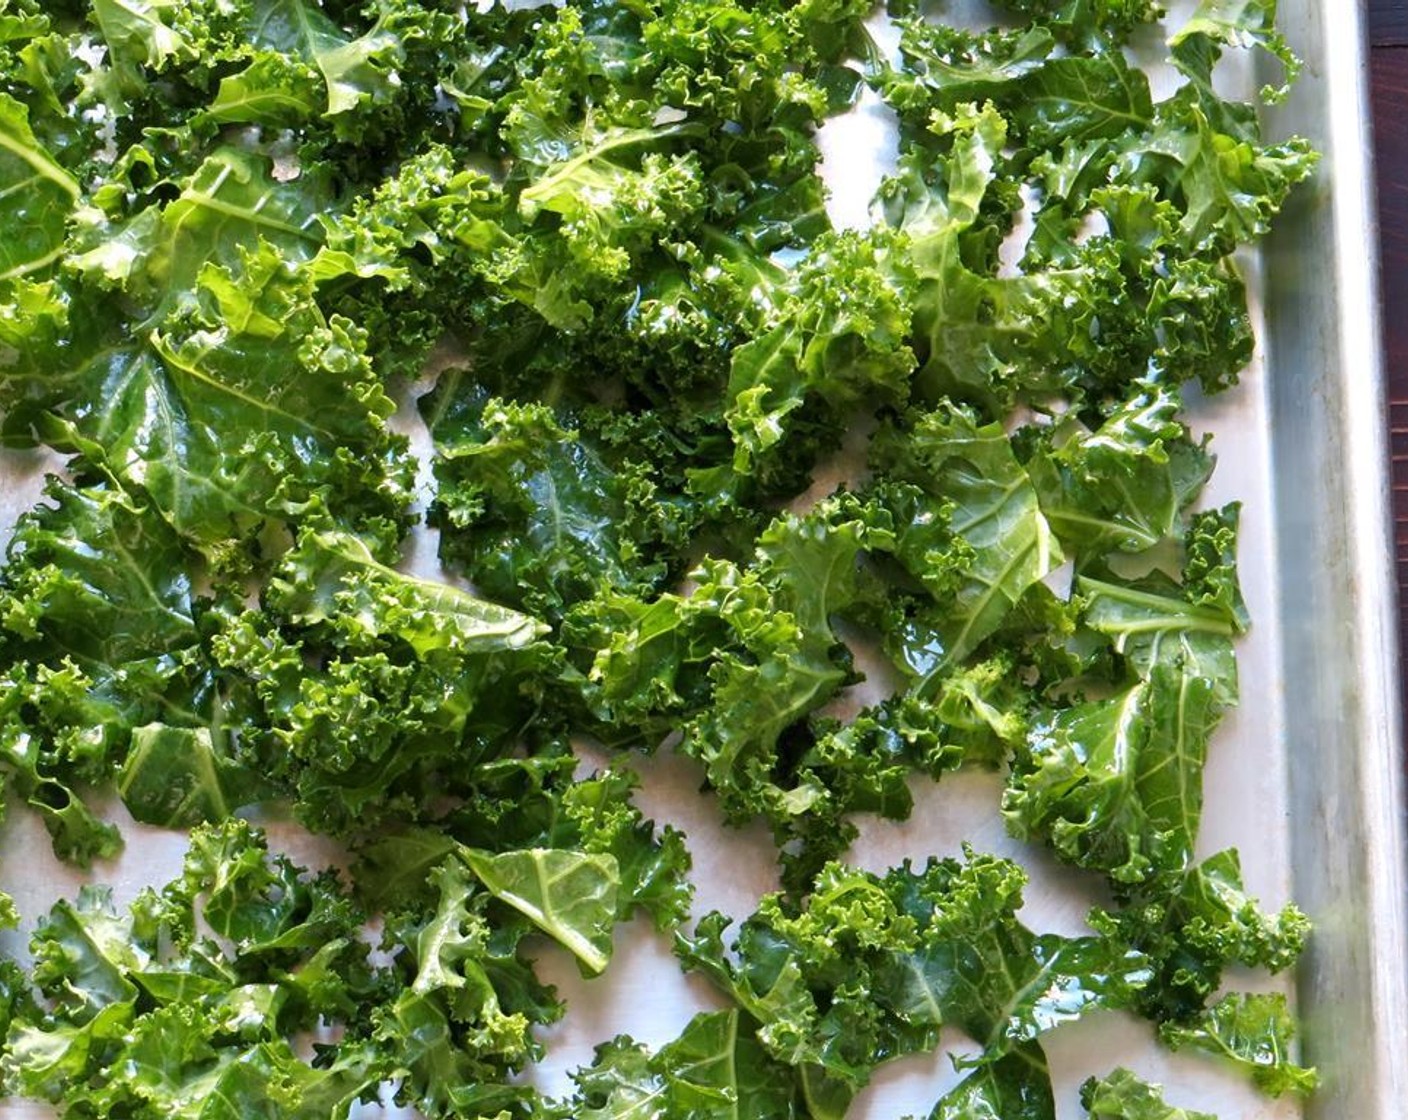 step 3 Place the dried kale in a bowl and toss to coat with Olive Oil (2 Tbsp). Spread it out onto a baking sheet lined with parchment paper.